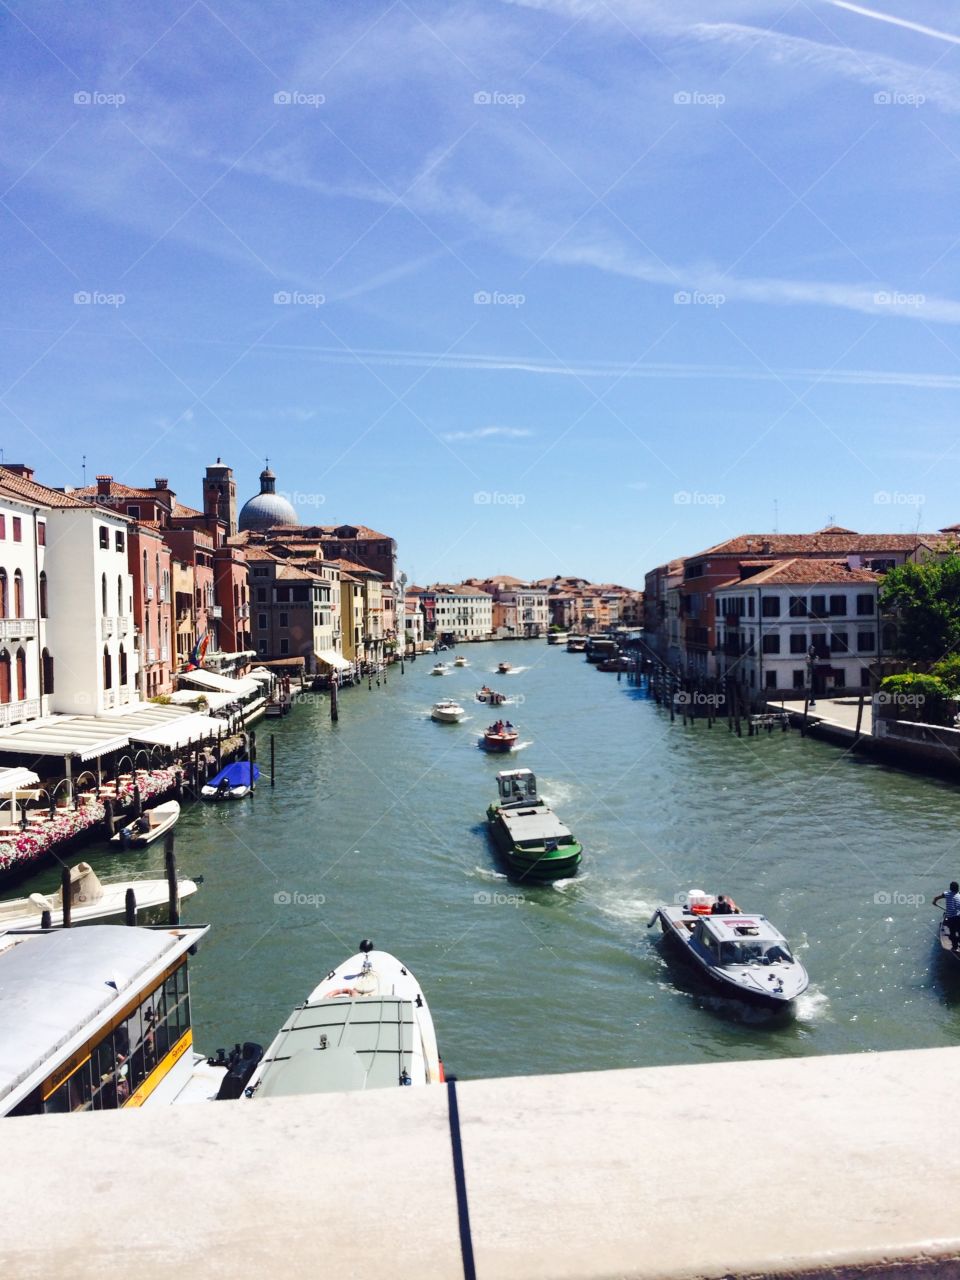 Venice is just "wow"